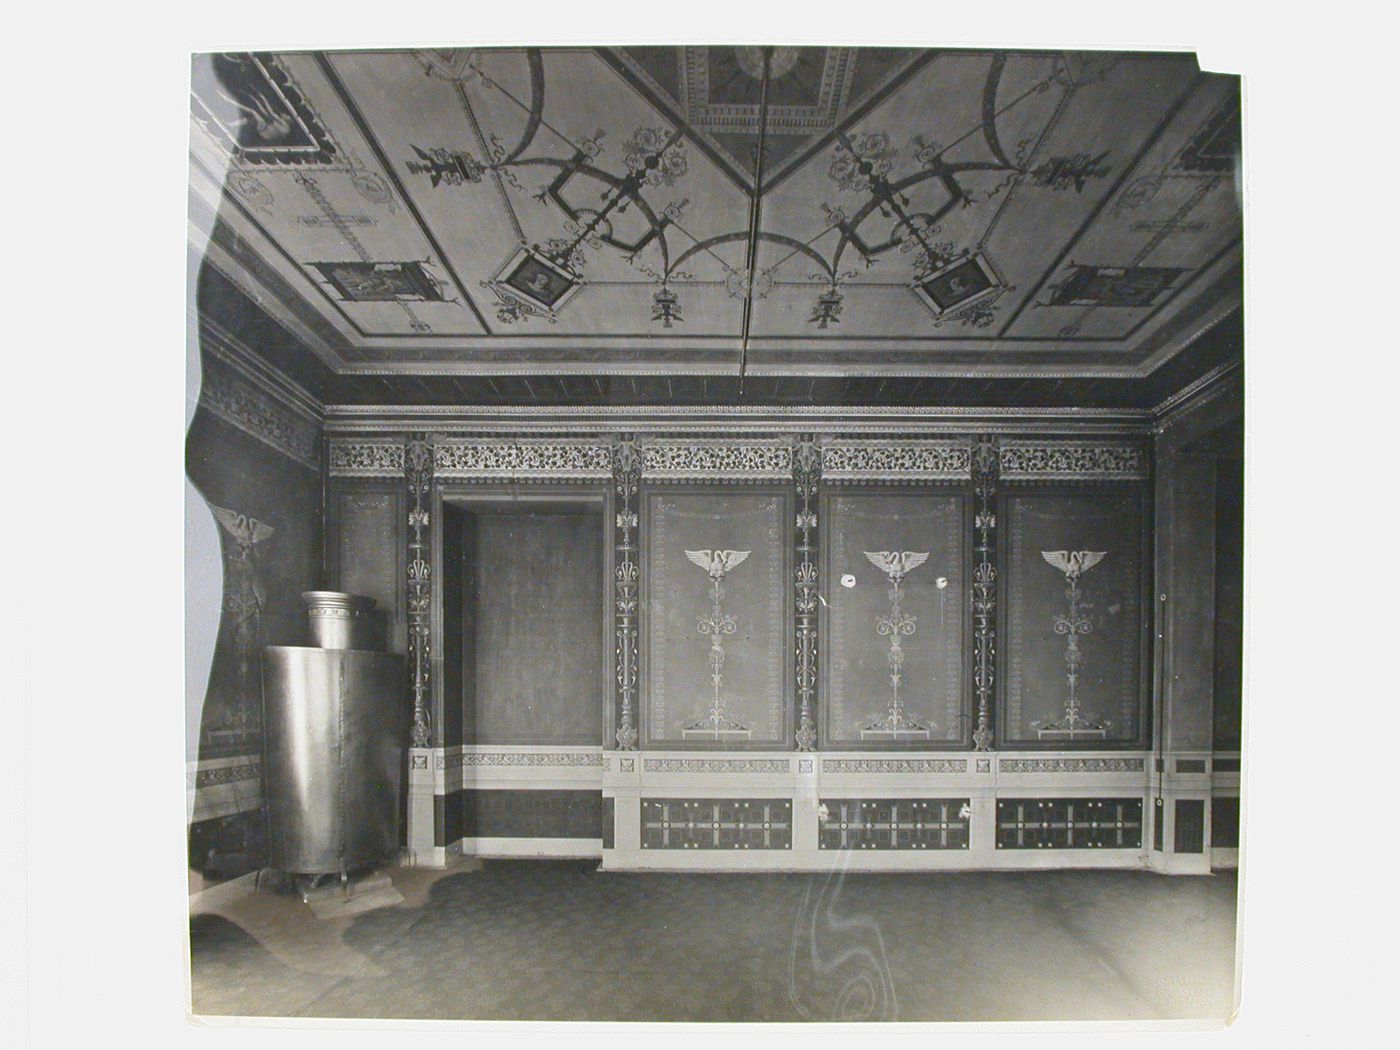 Interior view of a room in the Haus Schneider (now demolished) showing mural paintings on the walls and ceiling with a metal structure in the corner on the left, 51-53 Potsdamerstraße, Berlin, Germany